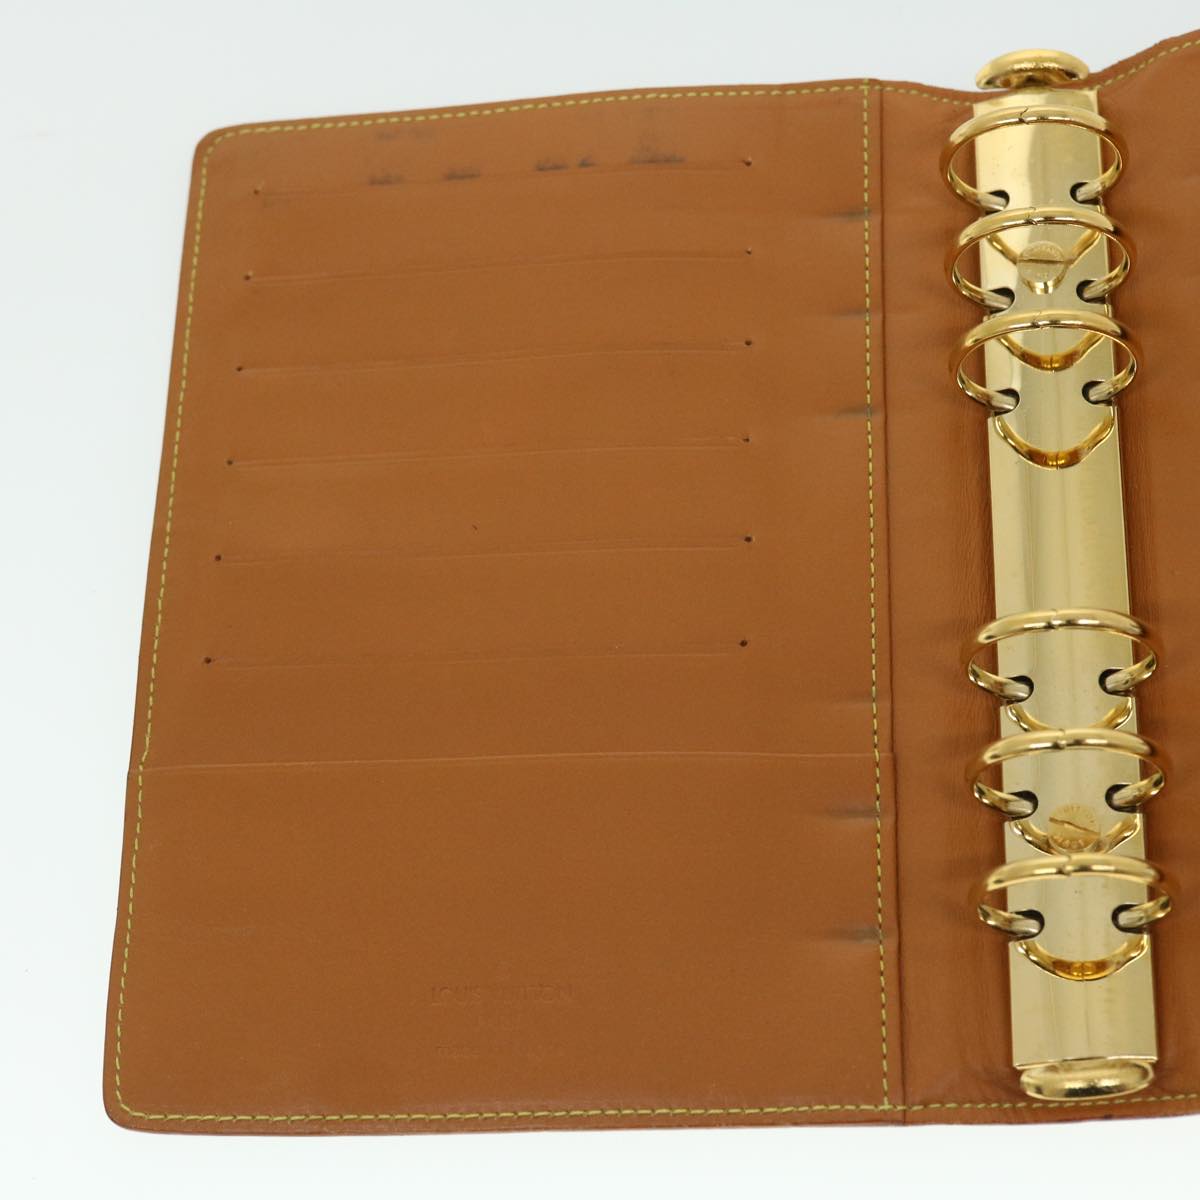 LOUIS VUITTON Nomad Leather Agenda MM Day Planner Cover Beige R20473 Auth 52294